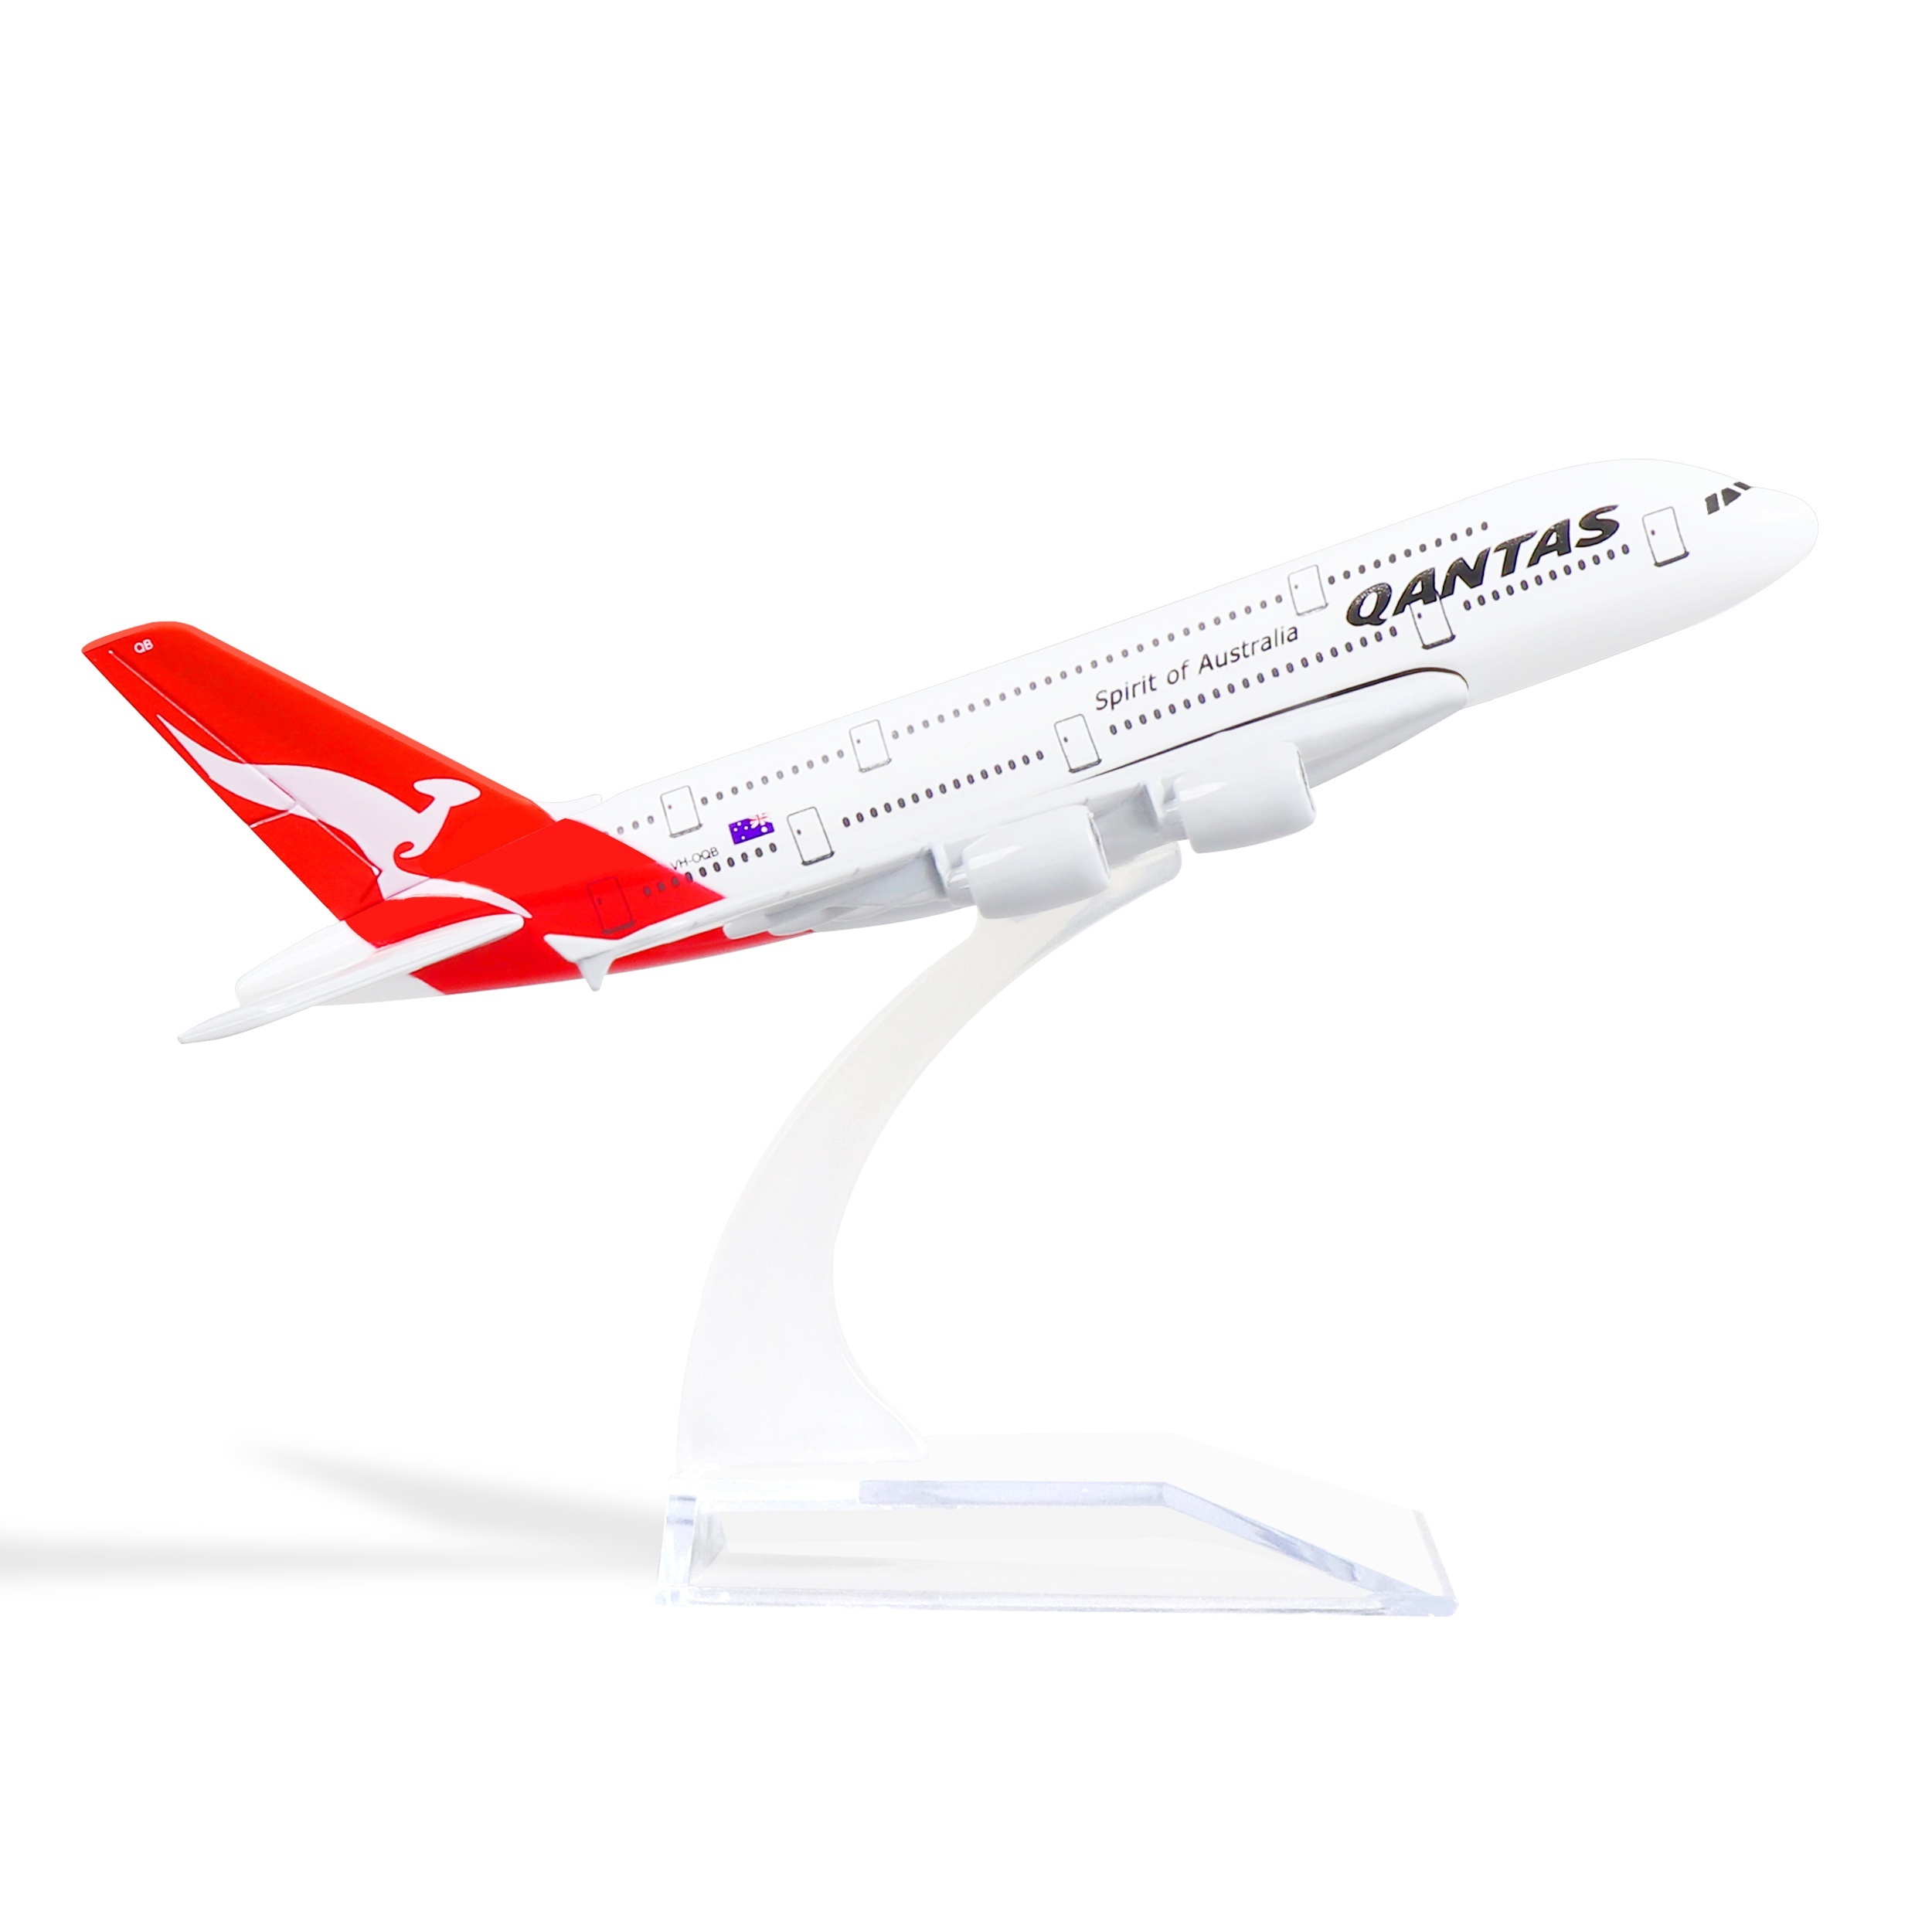 

Airbus A380 Airplane Model Toys Qantas Airways 1:400 Metal Diecast Sky Jumbo Airliner Model For Collectibles And Gifts